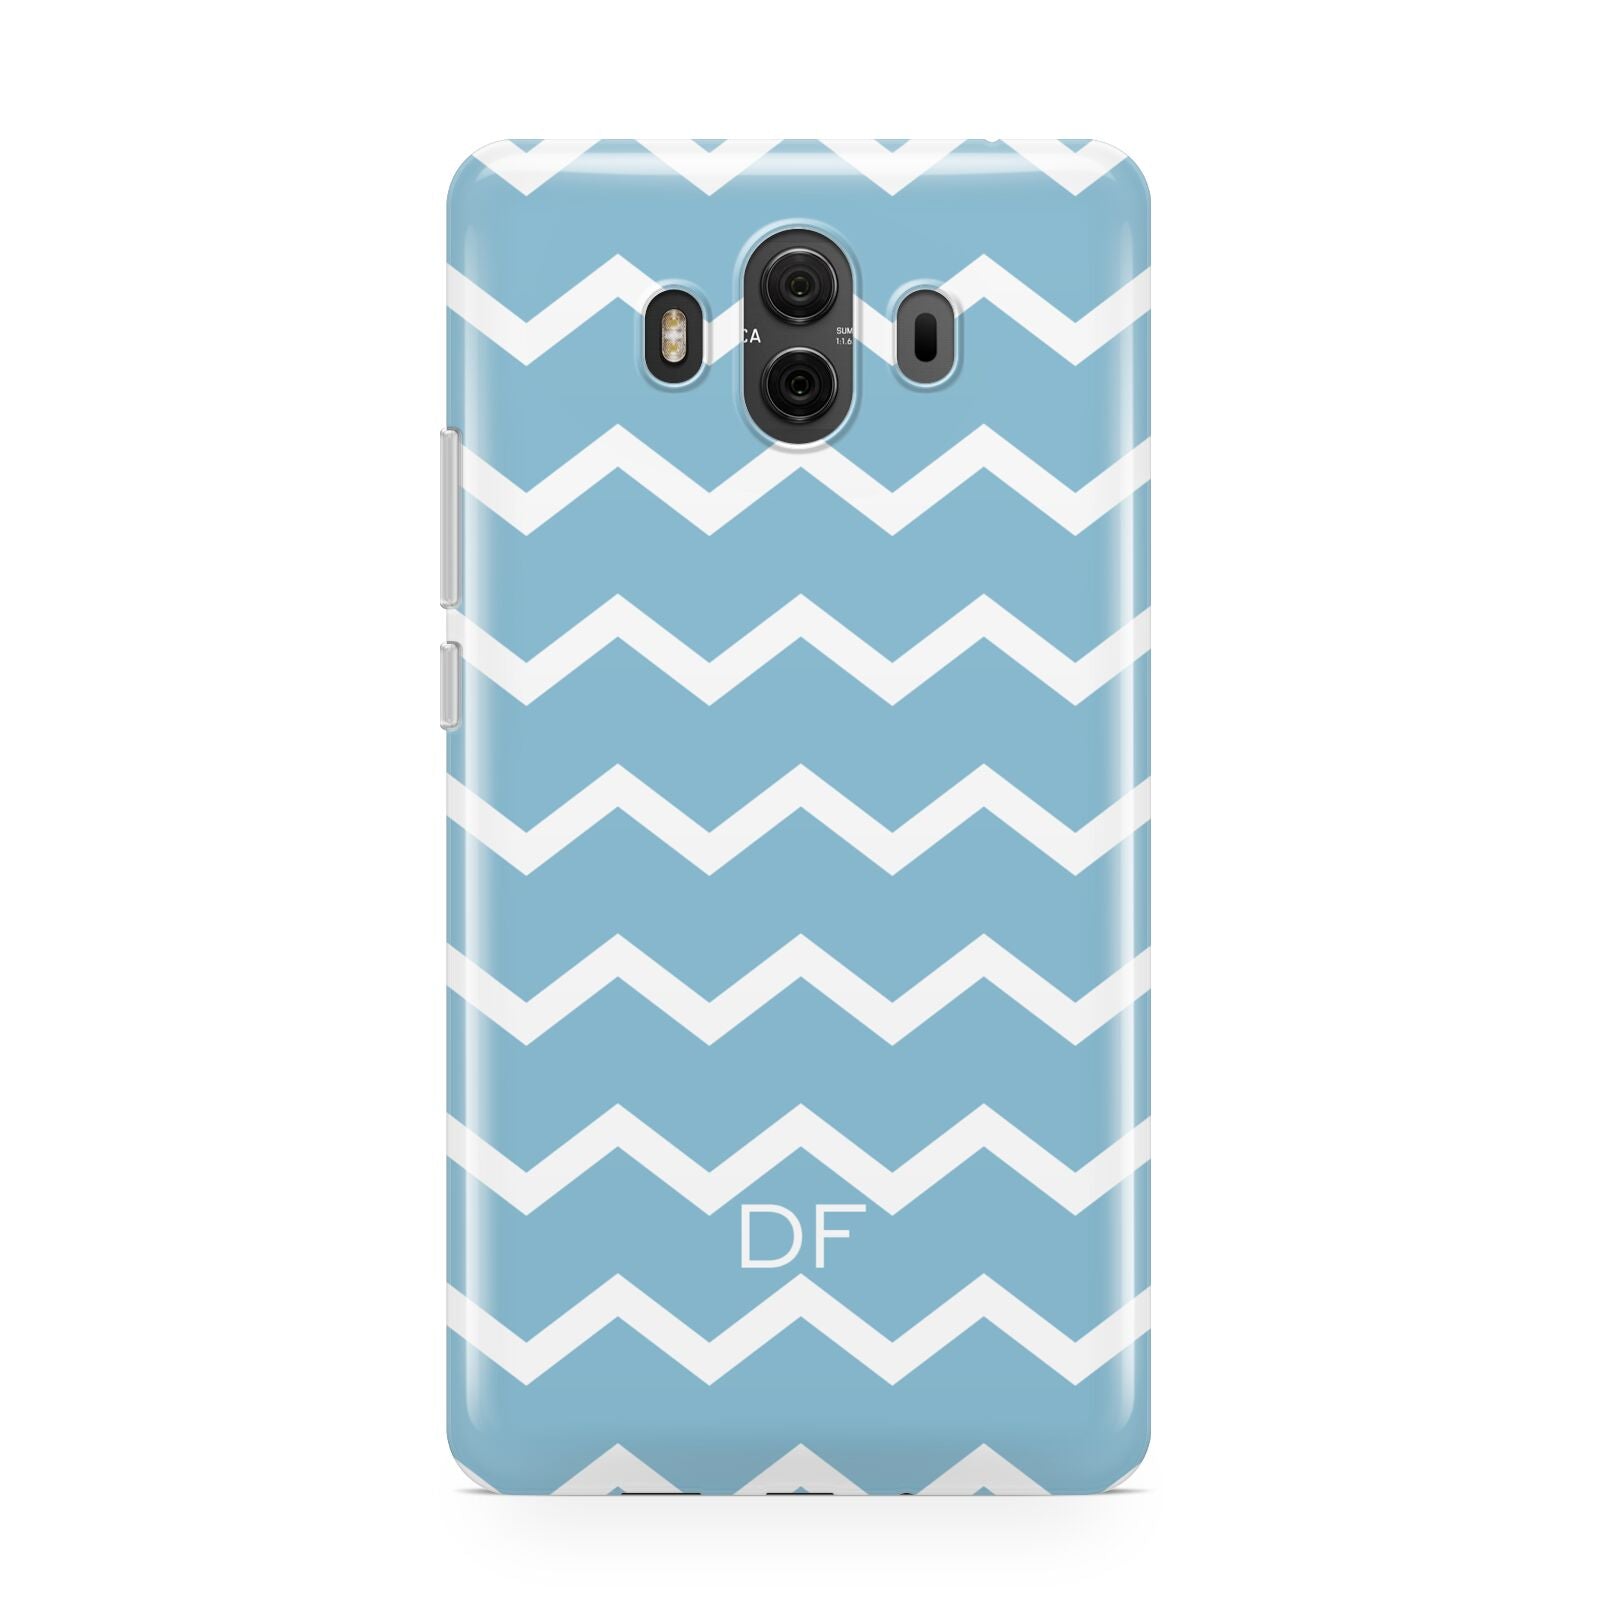 Personalised Chevron Blue Huawei Mate 10 Protective Phone Case